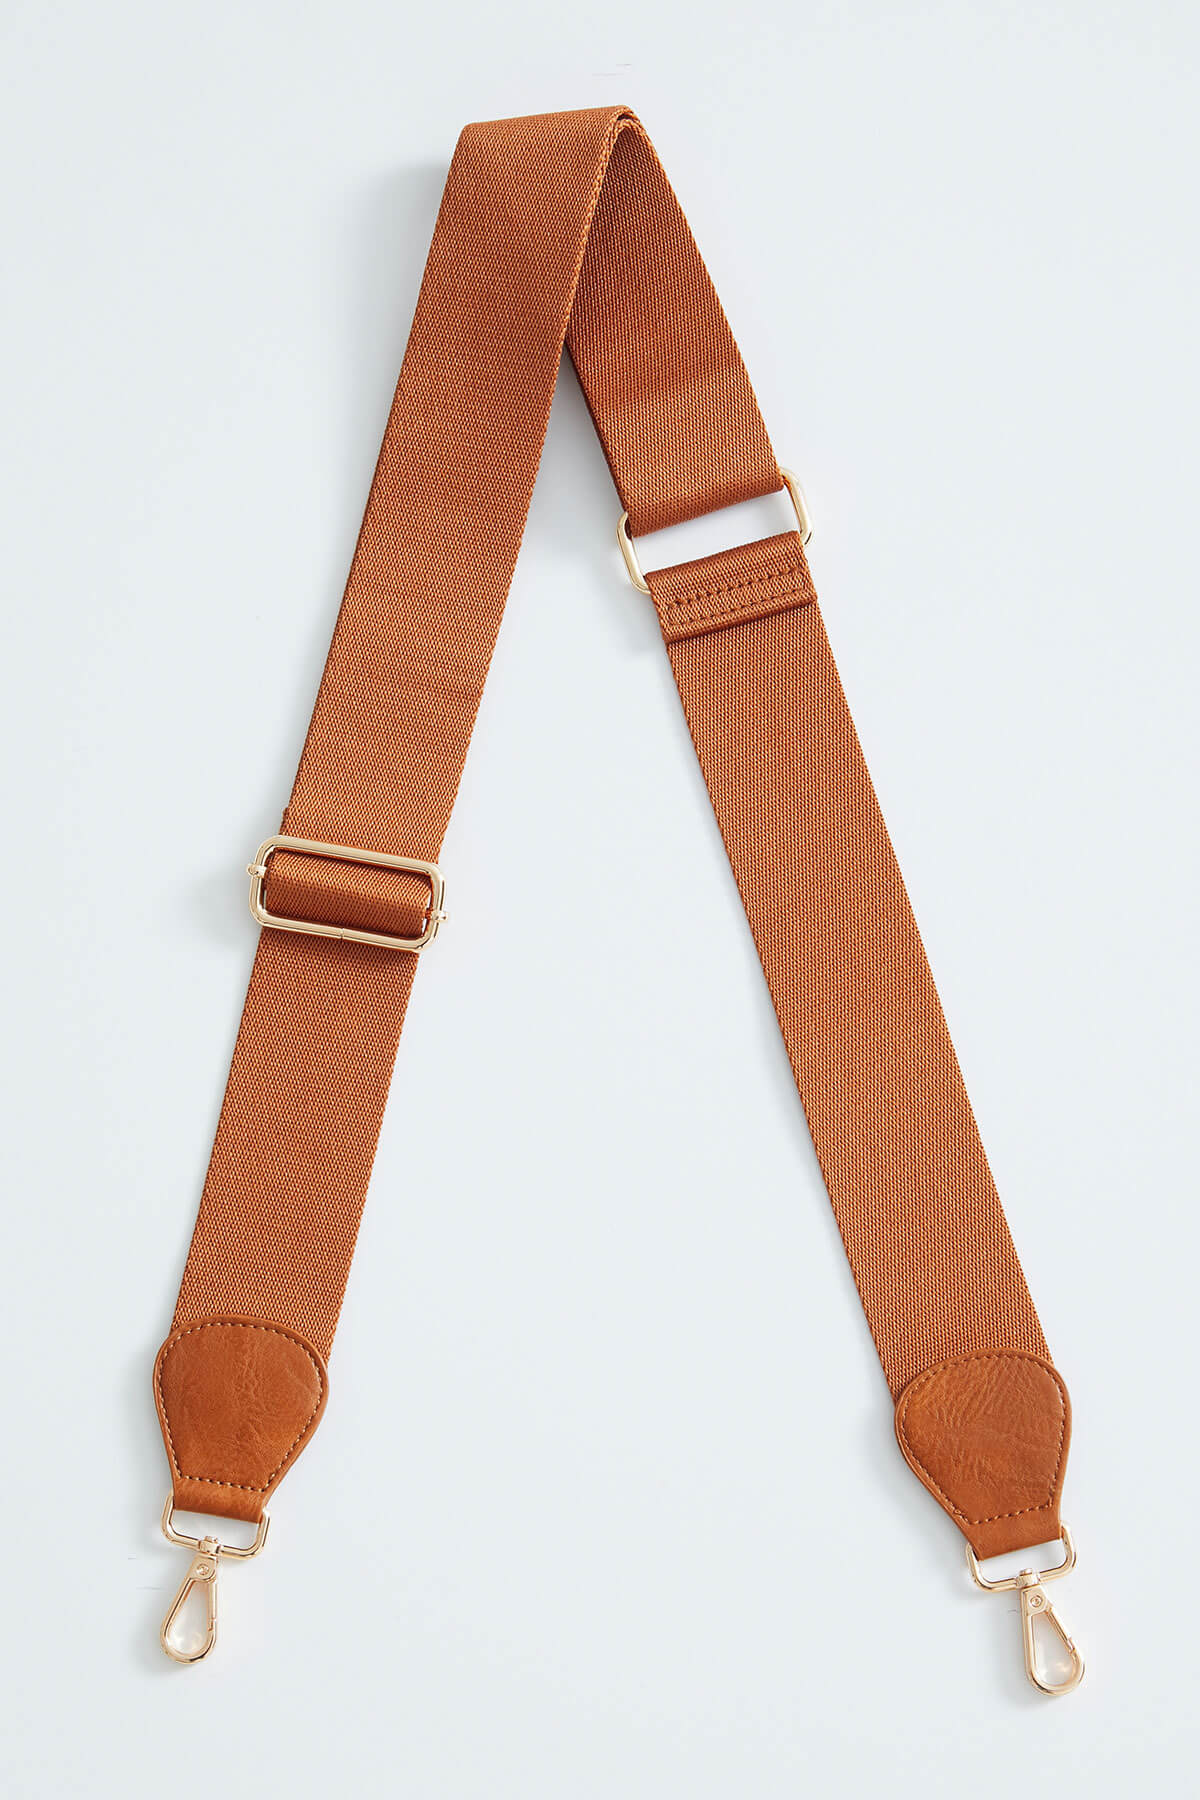 Blaire Wide Woven Bag Strap - Final Sale Camel + White - Modern and Chic Boutique